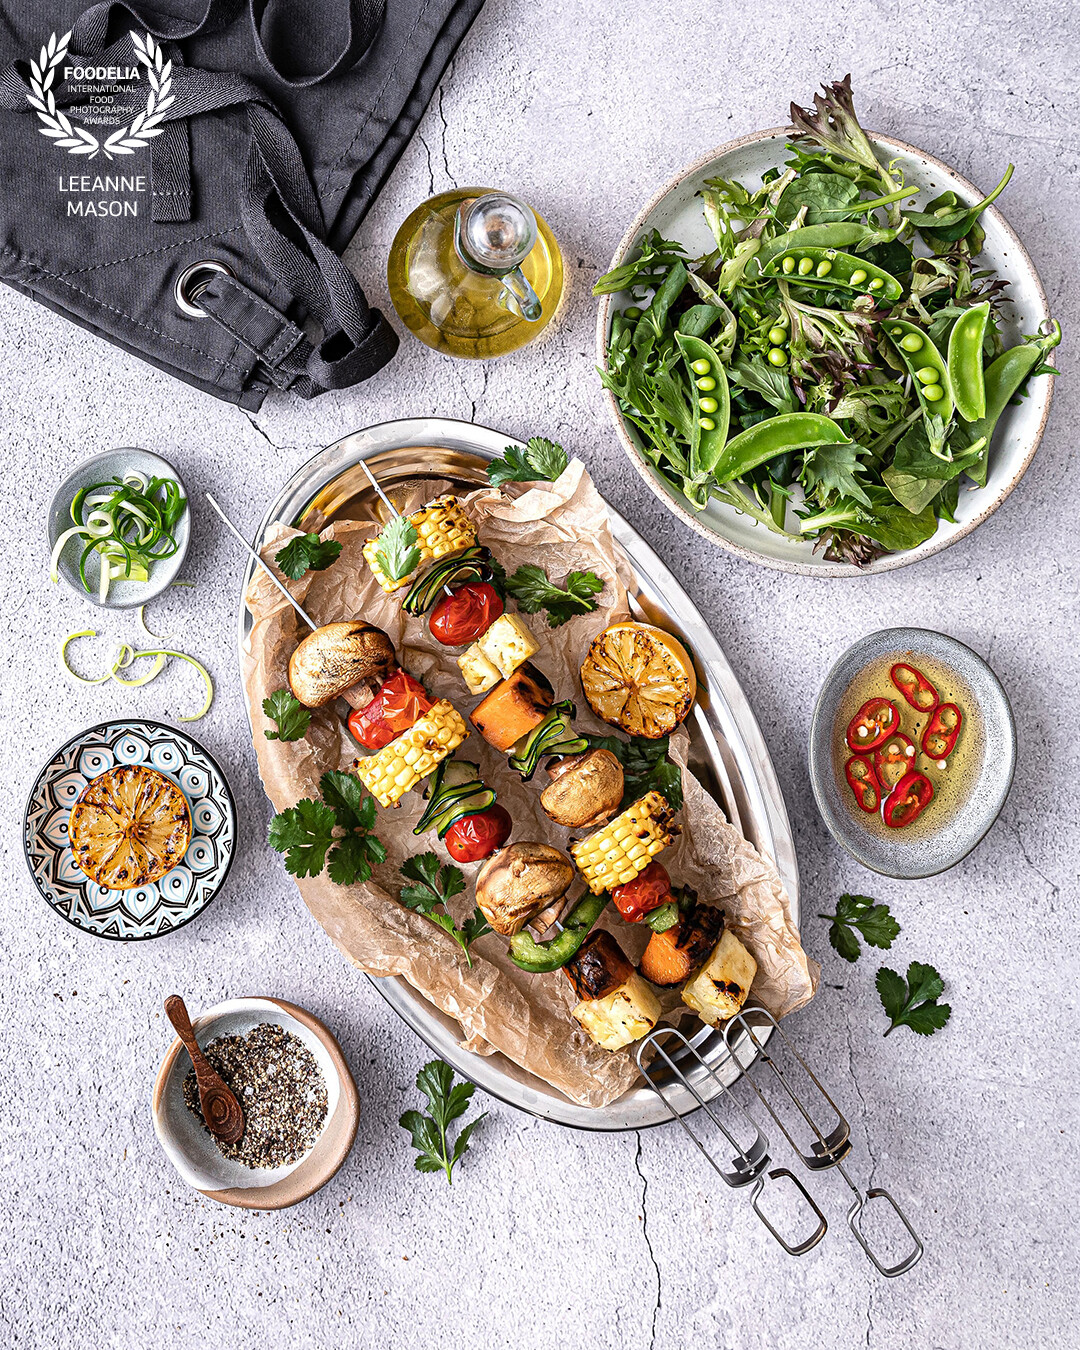 I made these delicious BBQ Vegetable Kebabs with a green salad and chilli oil and spring onion garnish. I used all of the accompaniments to help tell the story and show abundance.